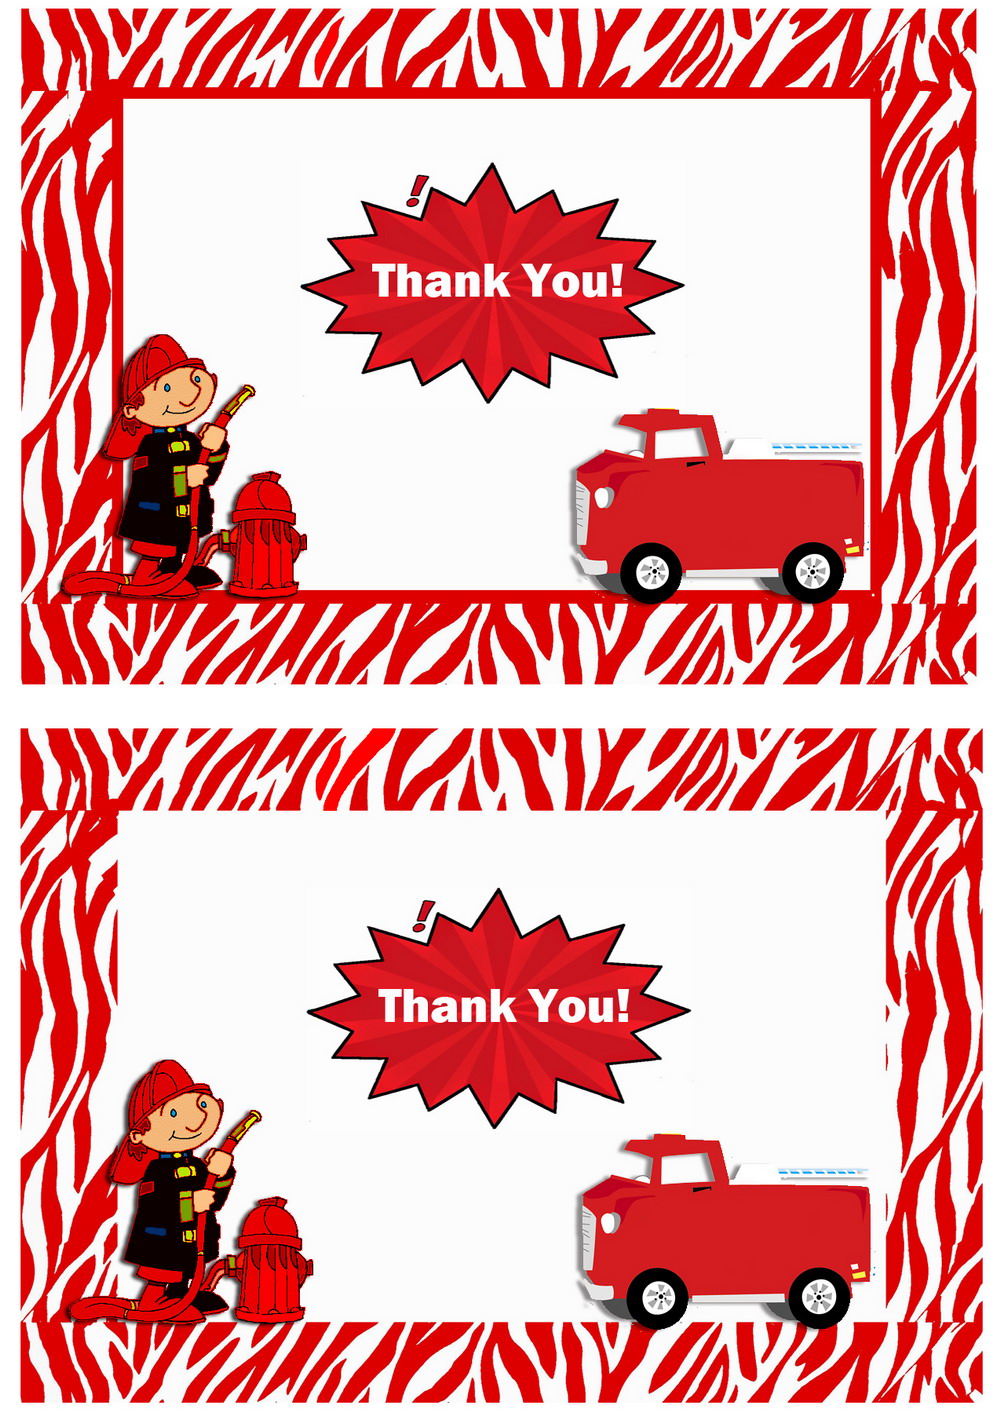 Firefighter Thank You Notes Firefighter Birthday Party Printable Firefighter Thank You Card Fireman Firefighter Birthday Thank You Card Thank You Cards Paper Party Supplies Timeglobaltech Com